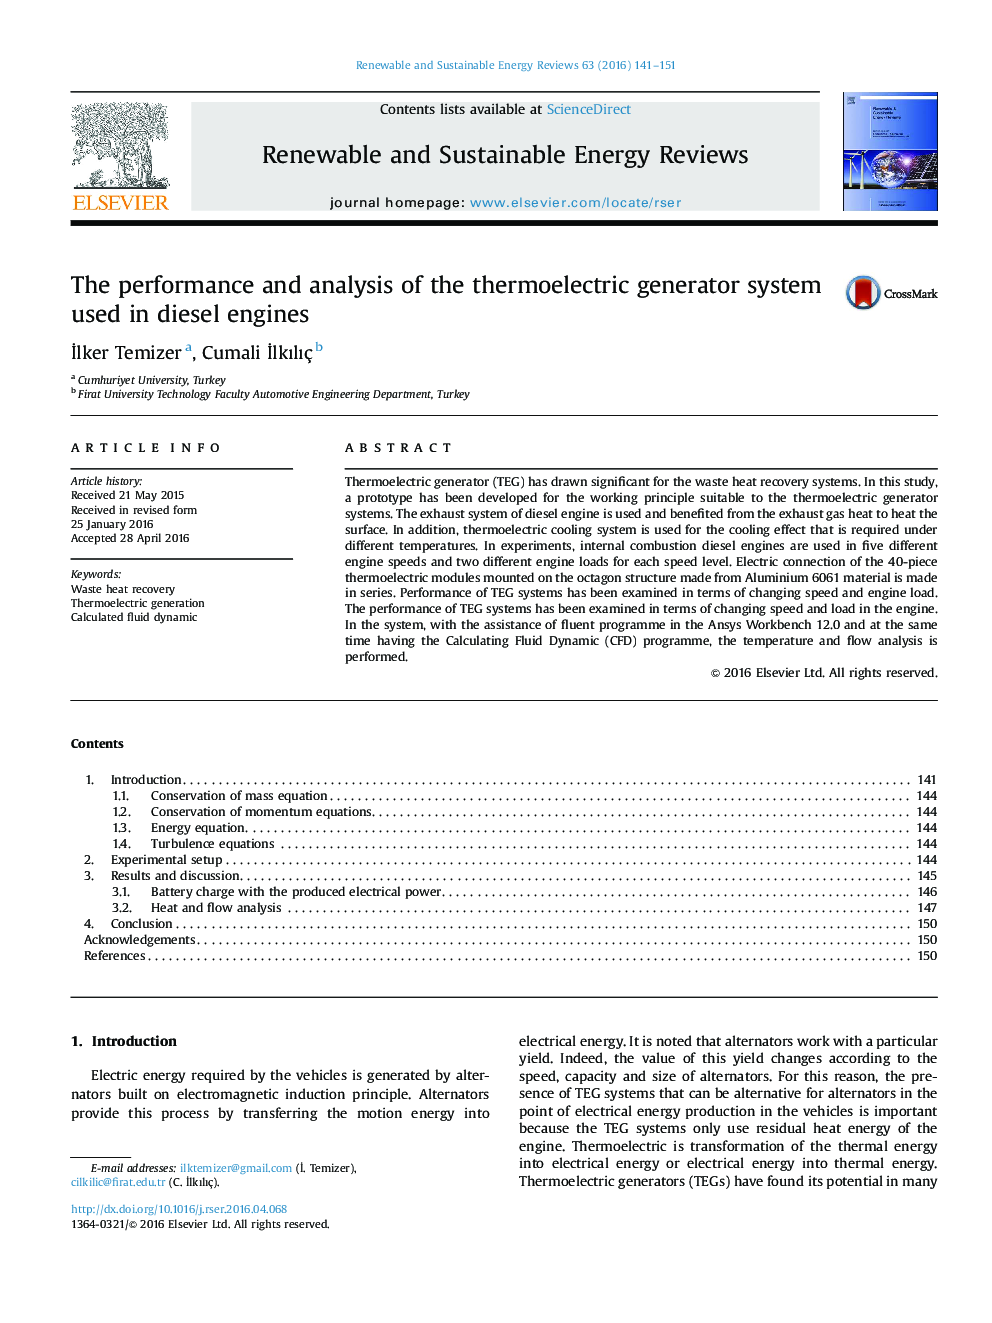 The performance and analysis of the thermoelectric generator system used in diesel engines